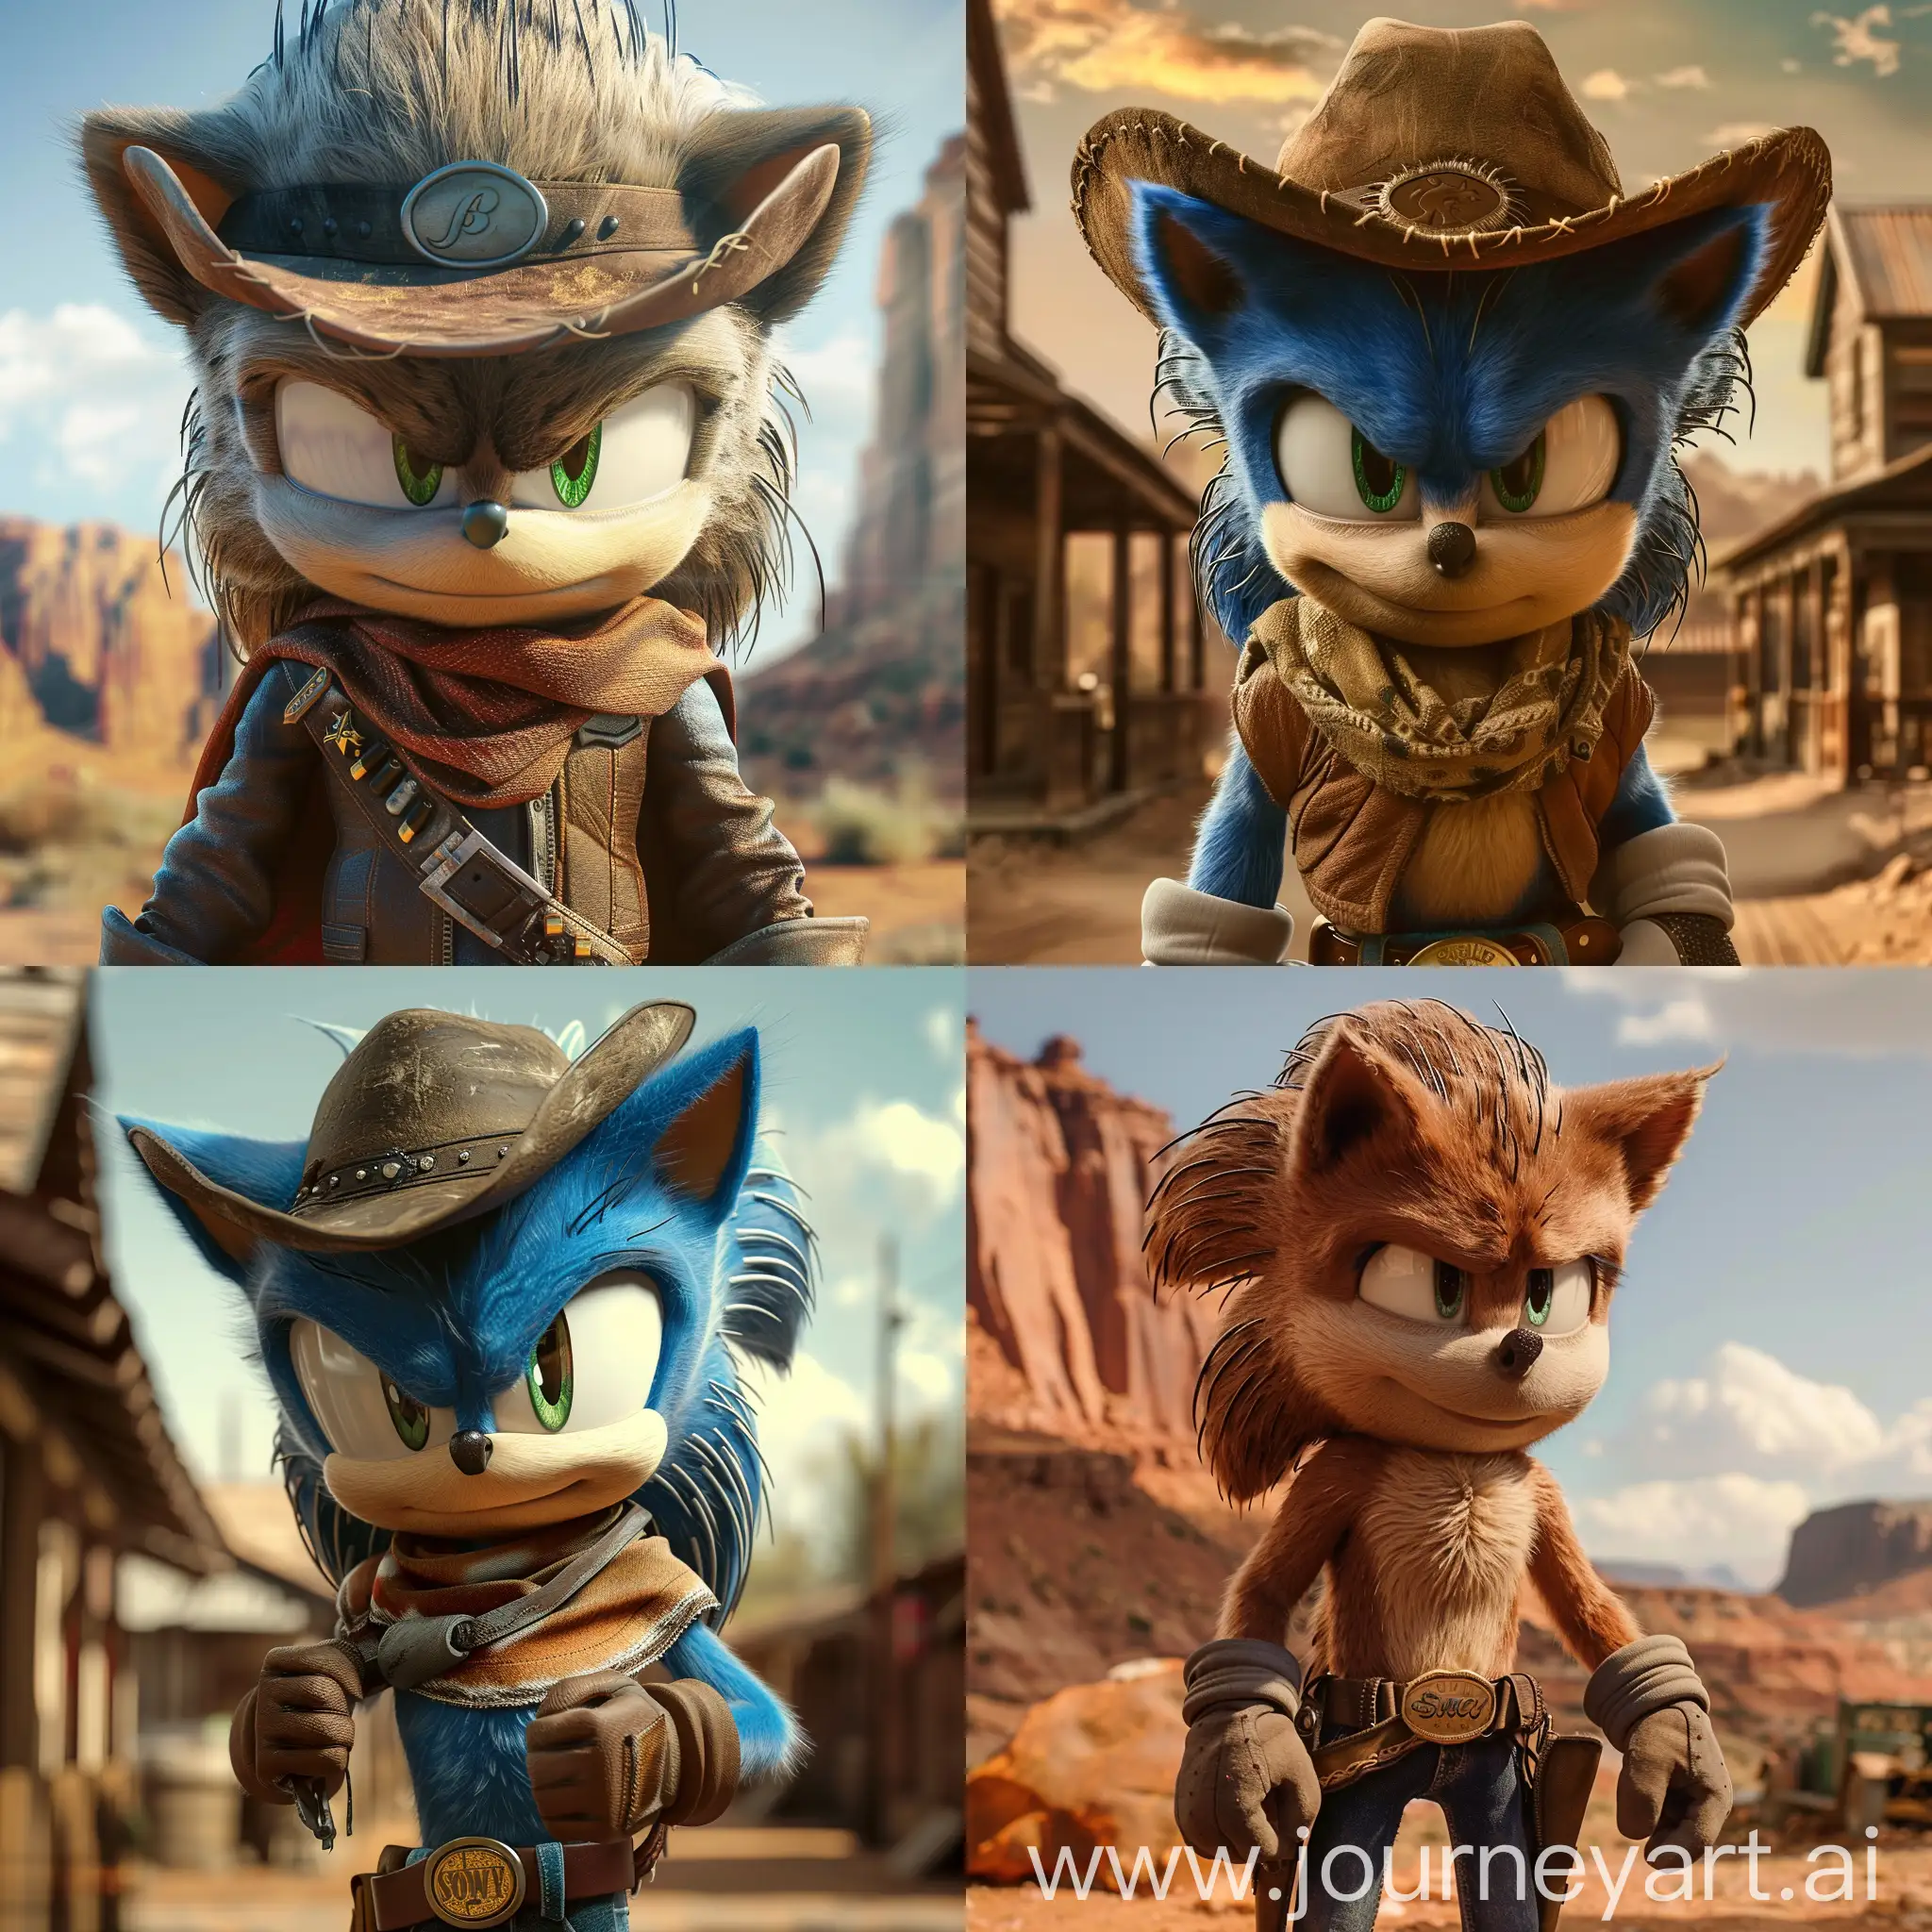 Sonic the hedgehog movie with cowboy clothes in the west